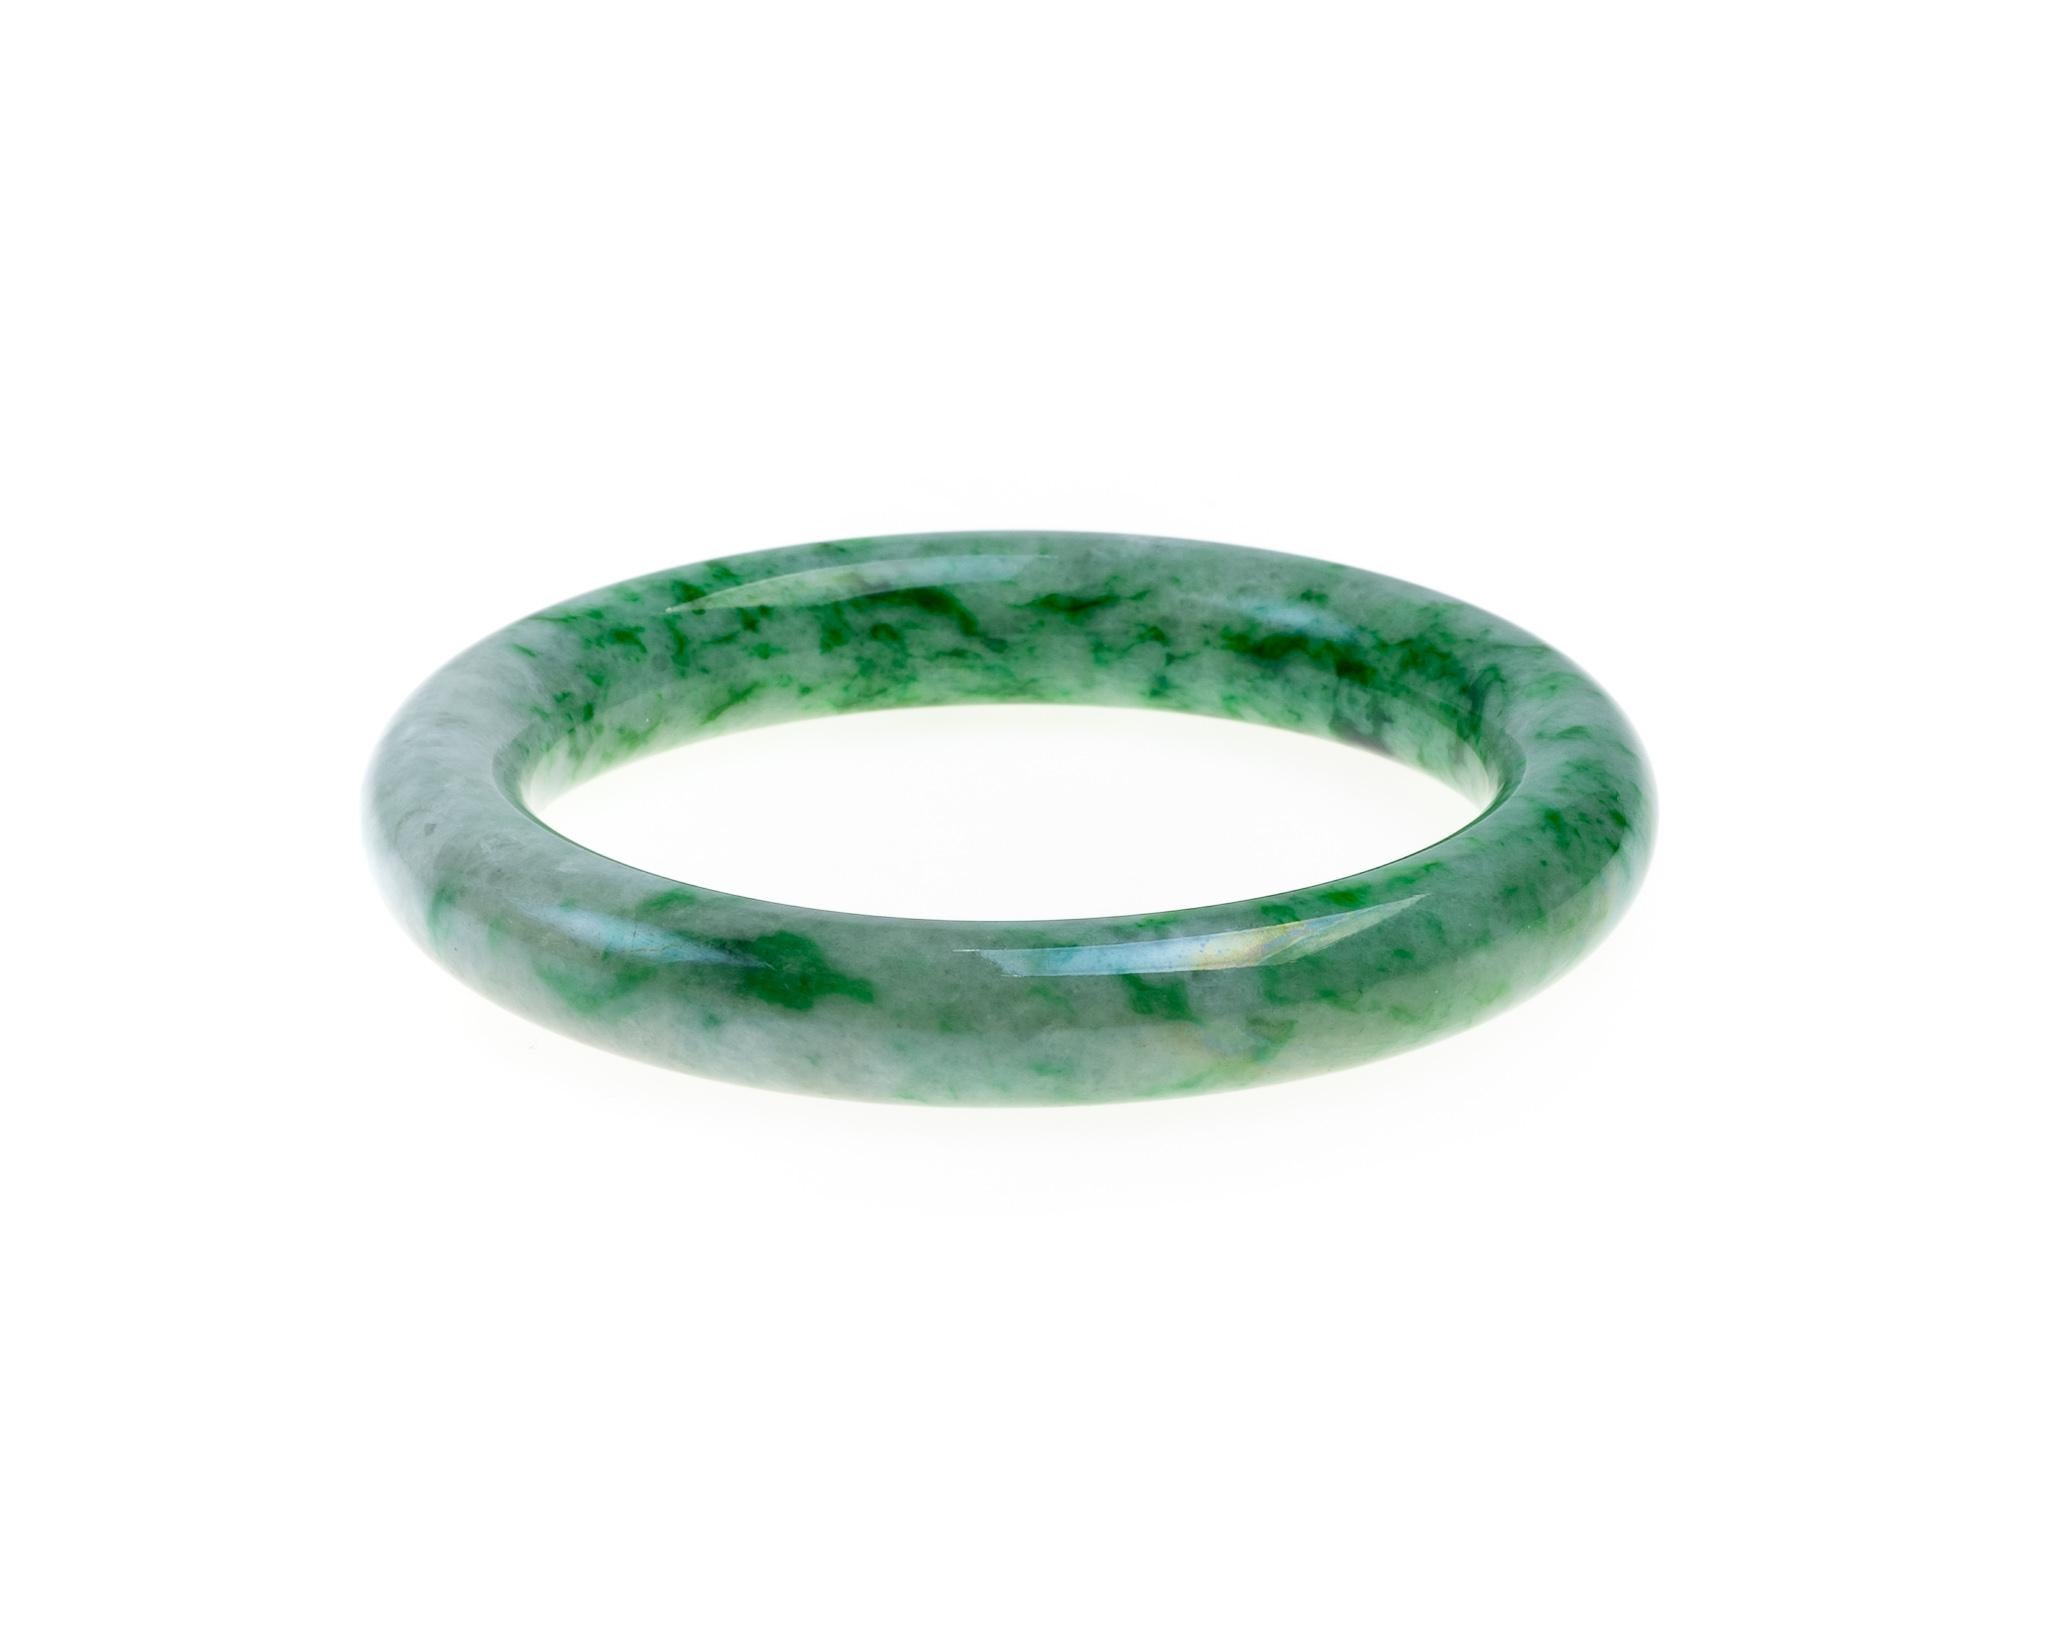 This all natural, untreated green jadeite jade bangle in size 55.6mm.  This bangle's inner diameter measures 2.19 inches (55.6mm) and outer diameter measures 2.98 inches (75.8mm) with bangle width of 0.43 inches (11mm).  

Included is a Hong Kong